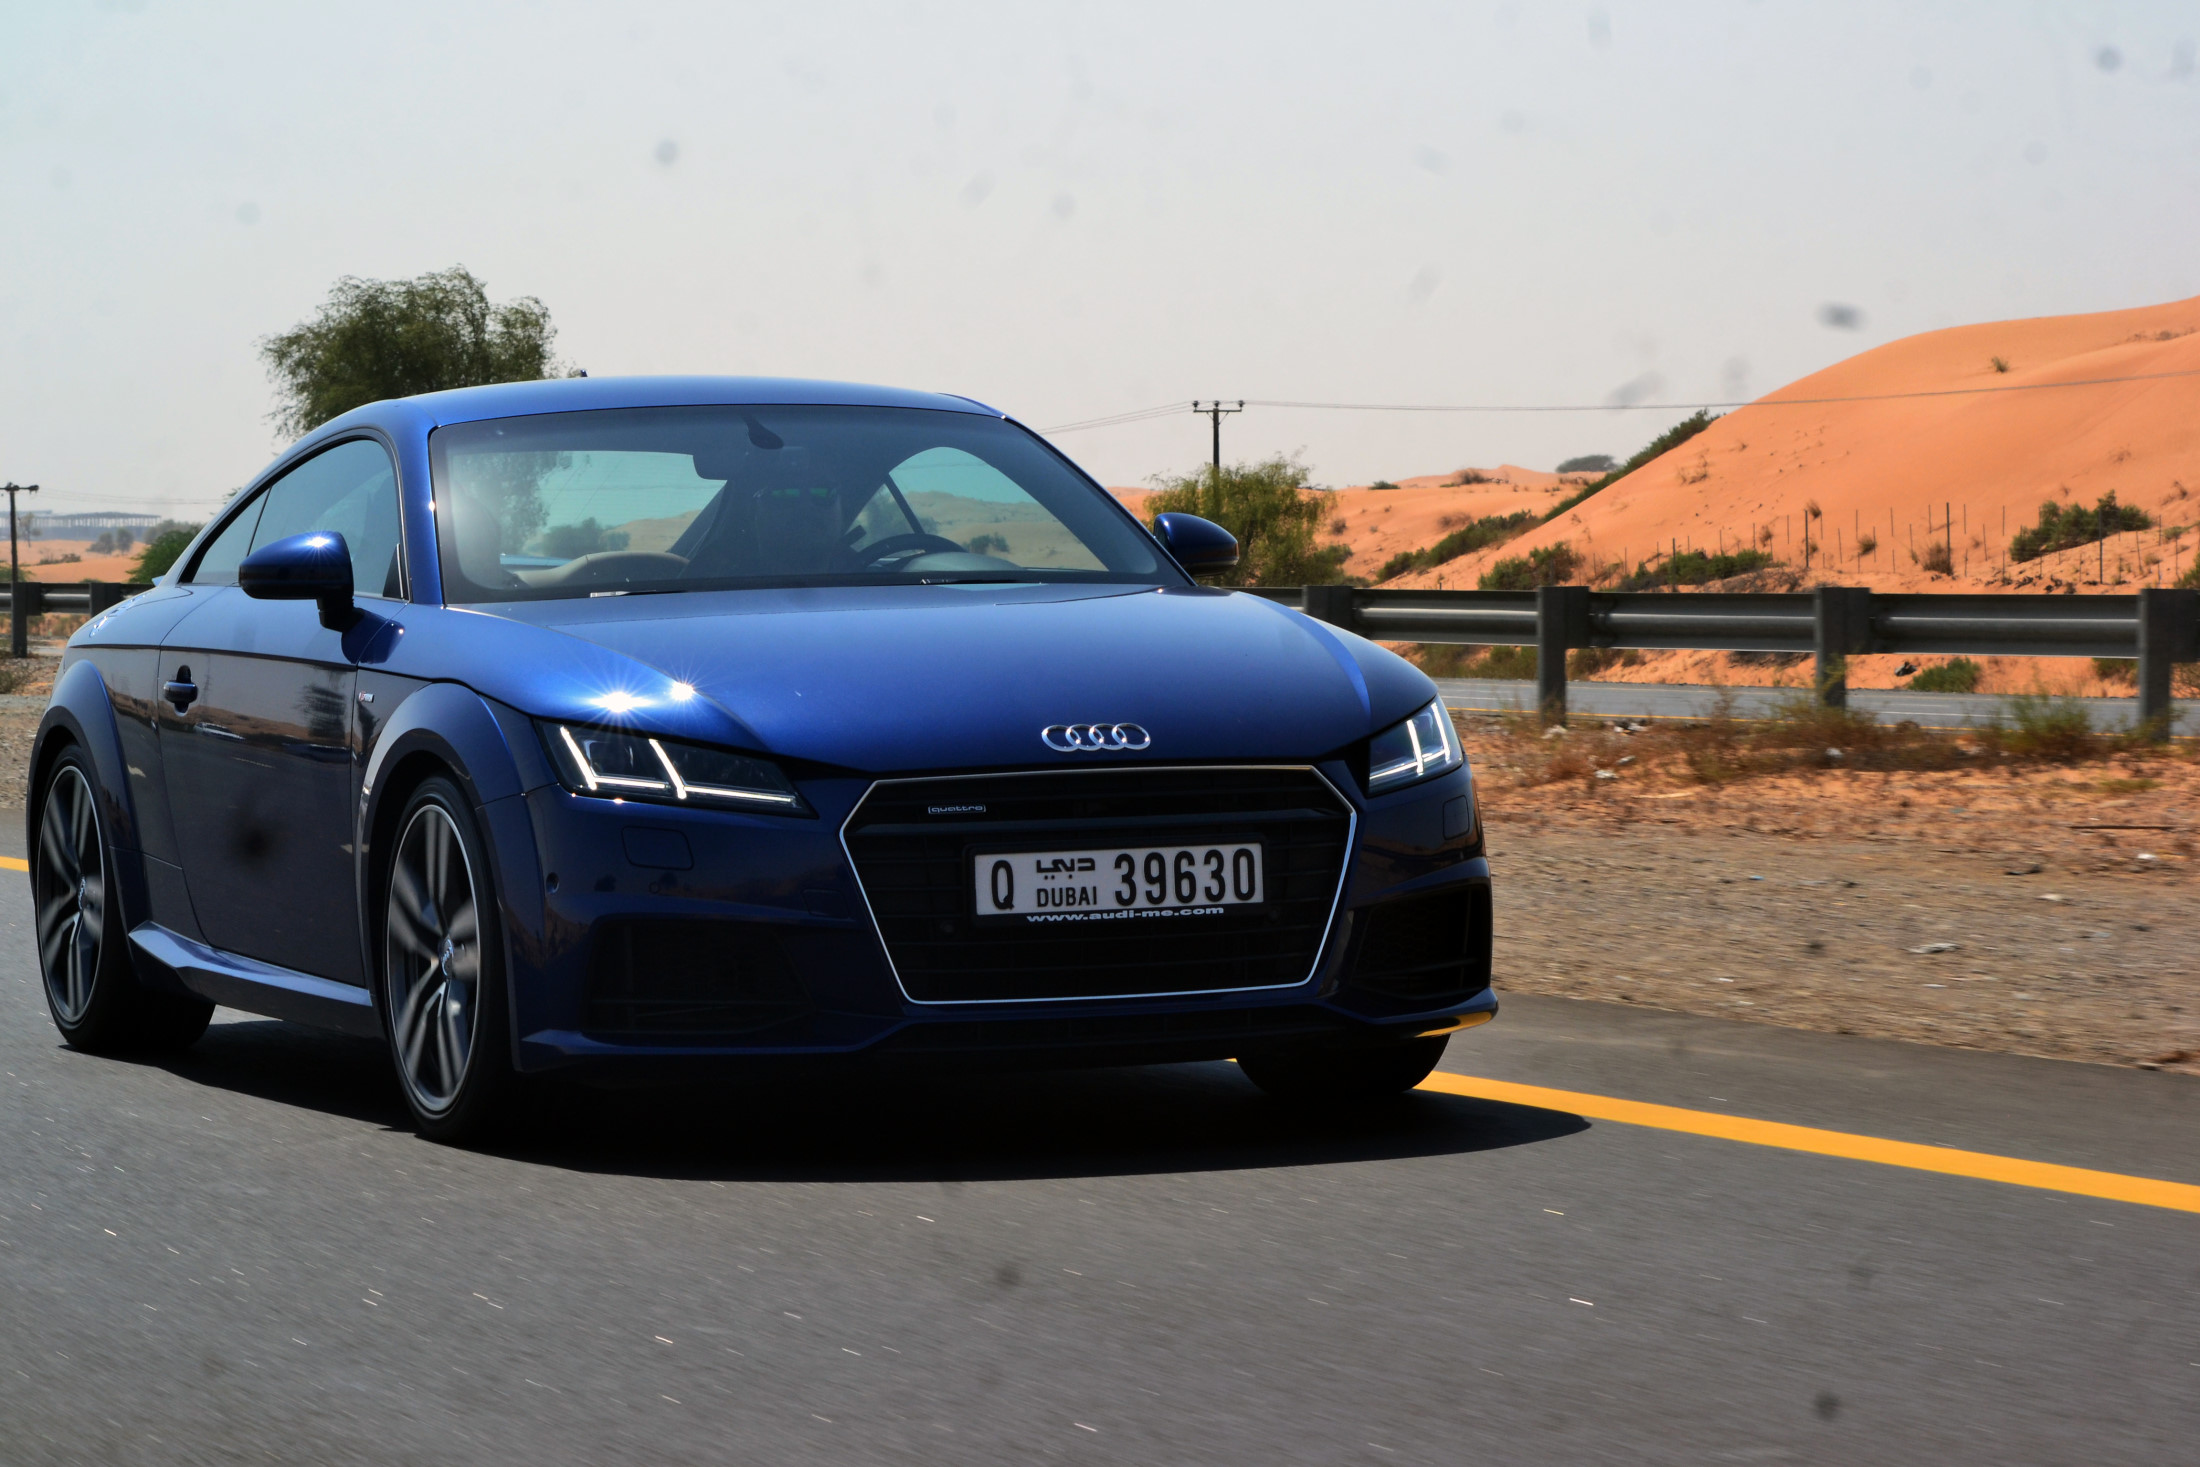 Audi TT 2015 45 TFSI - Price in India, Mileage, Reviews, Colours,  Specification, Images - Overdrive